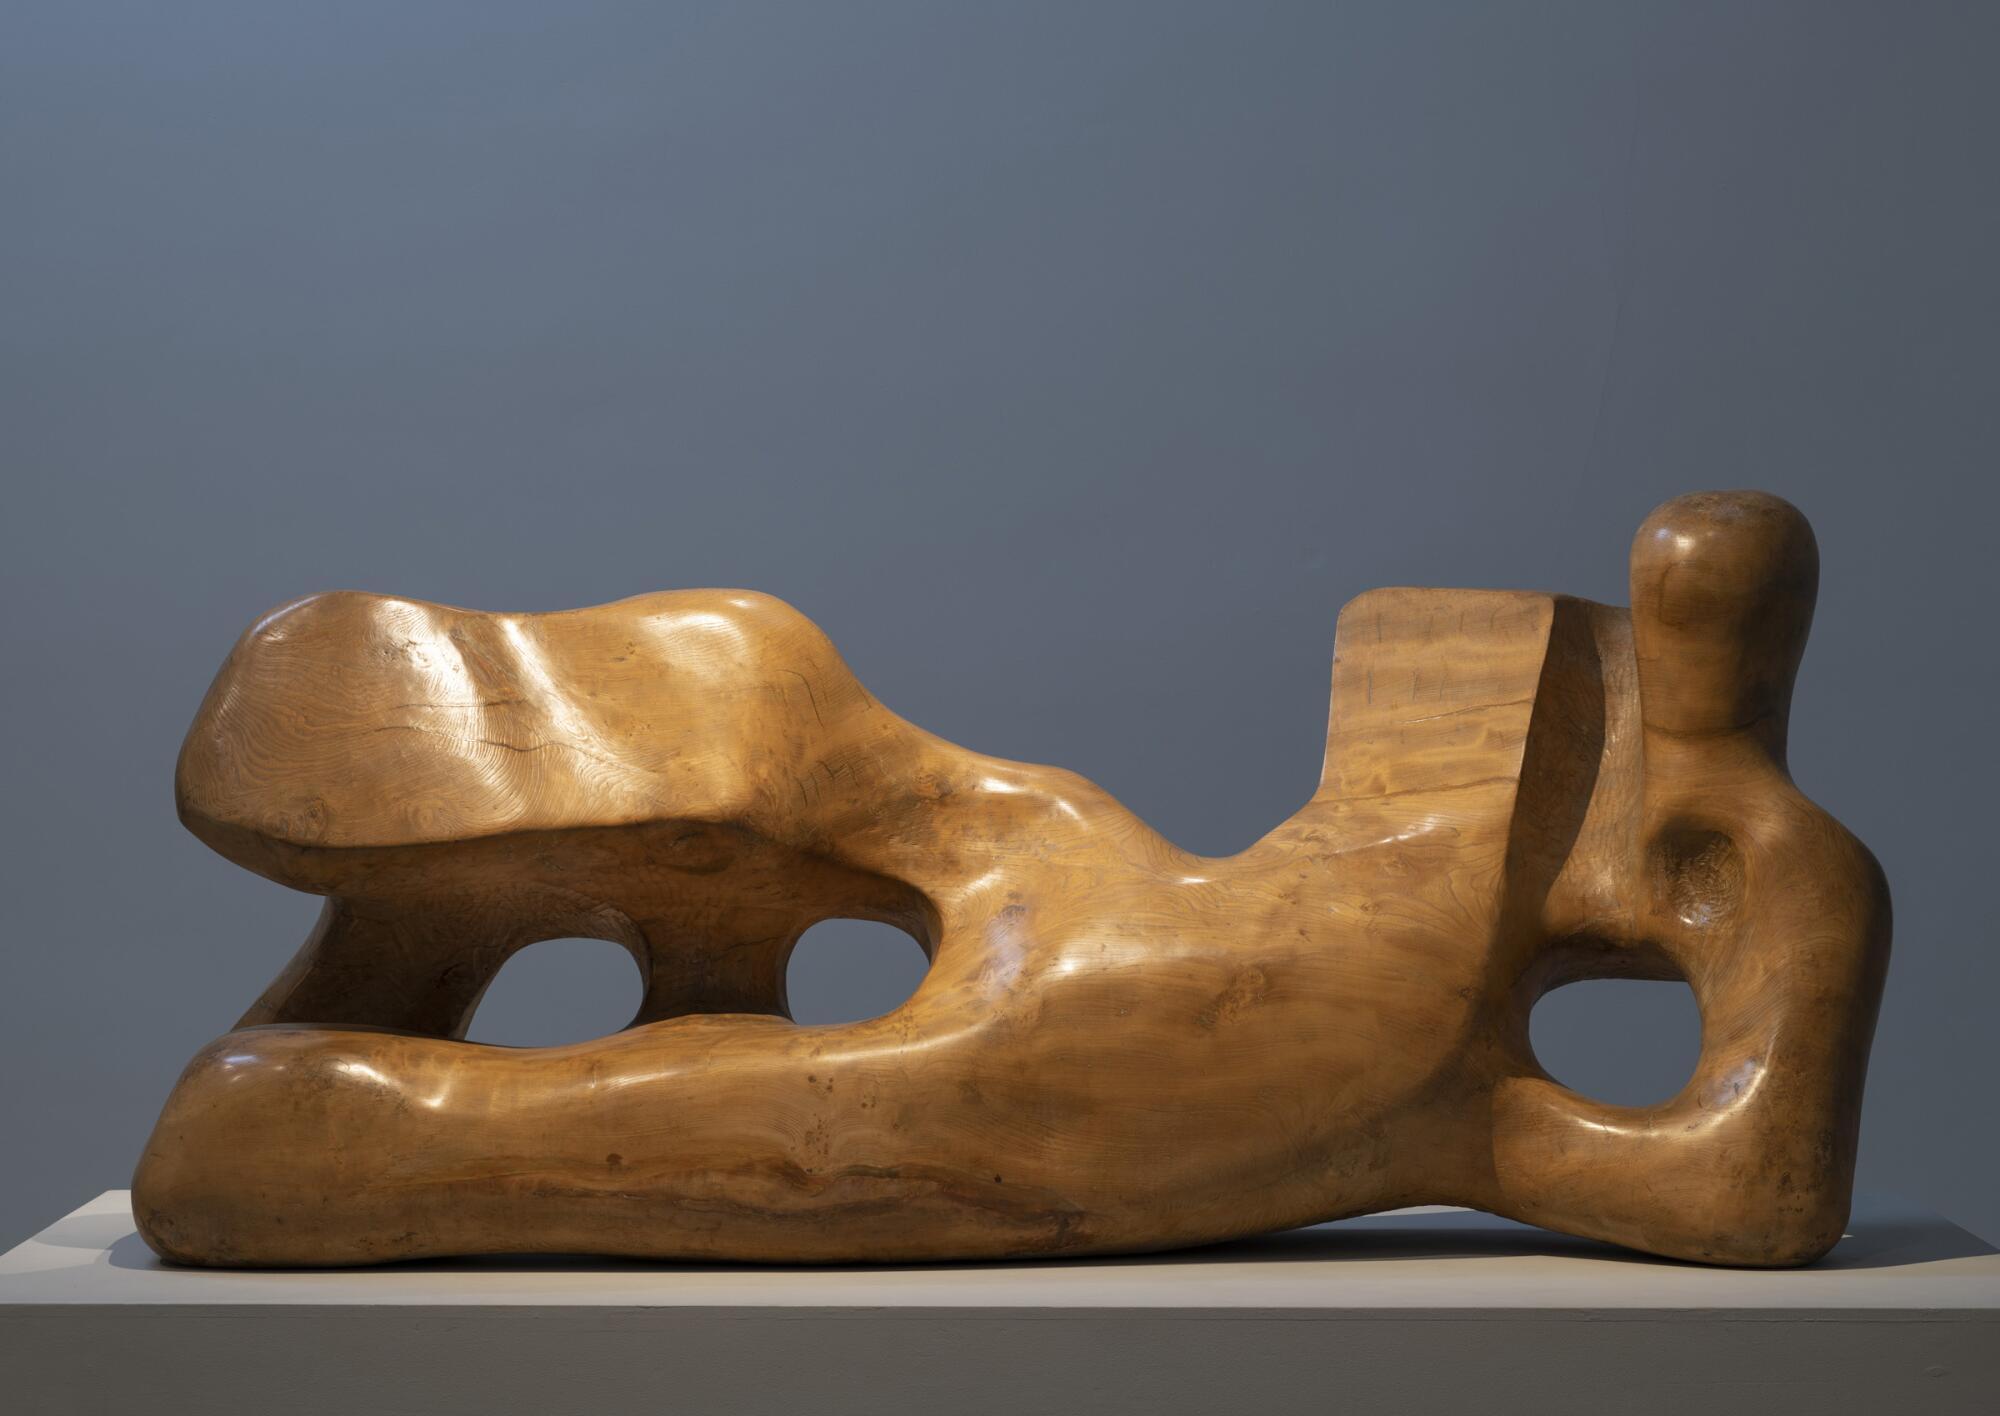 "Reclining Figure, 1959-64" by Henry Moore.